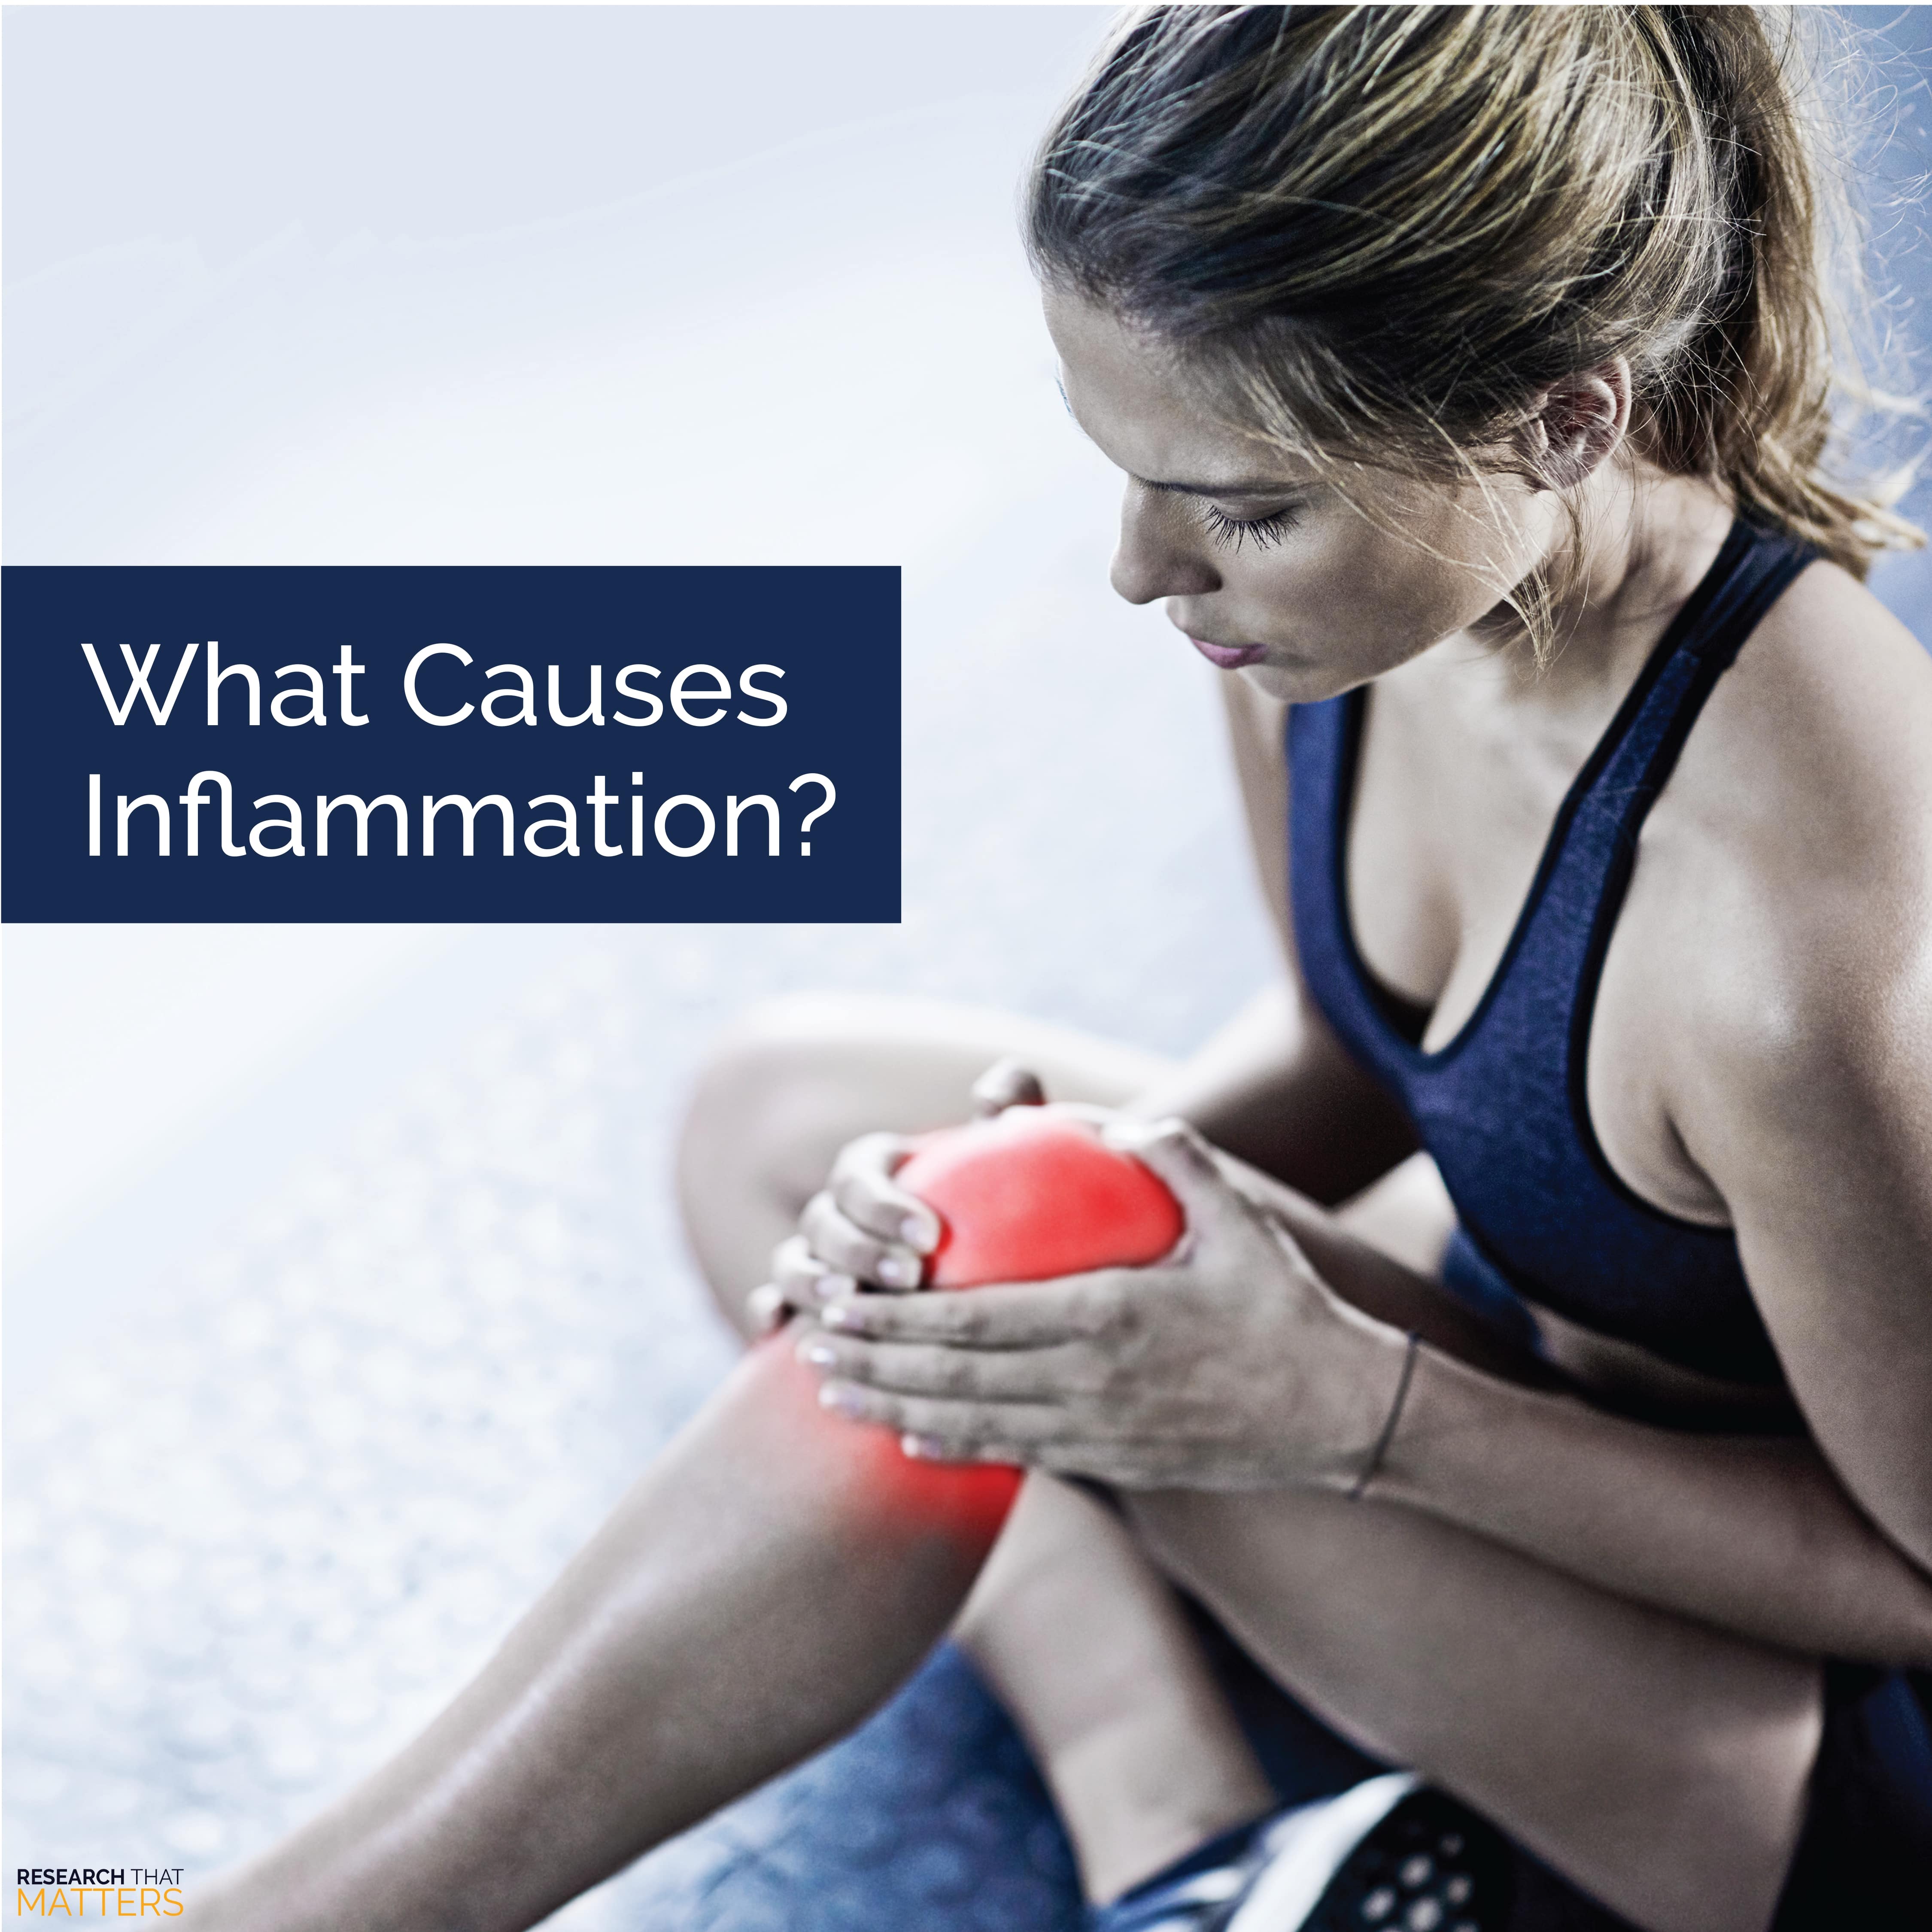 Week 1a - What Causes Inflammation